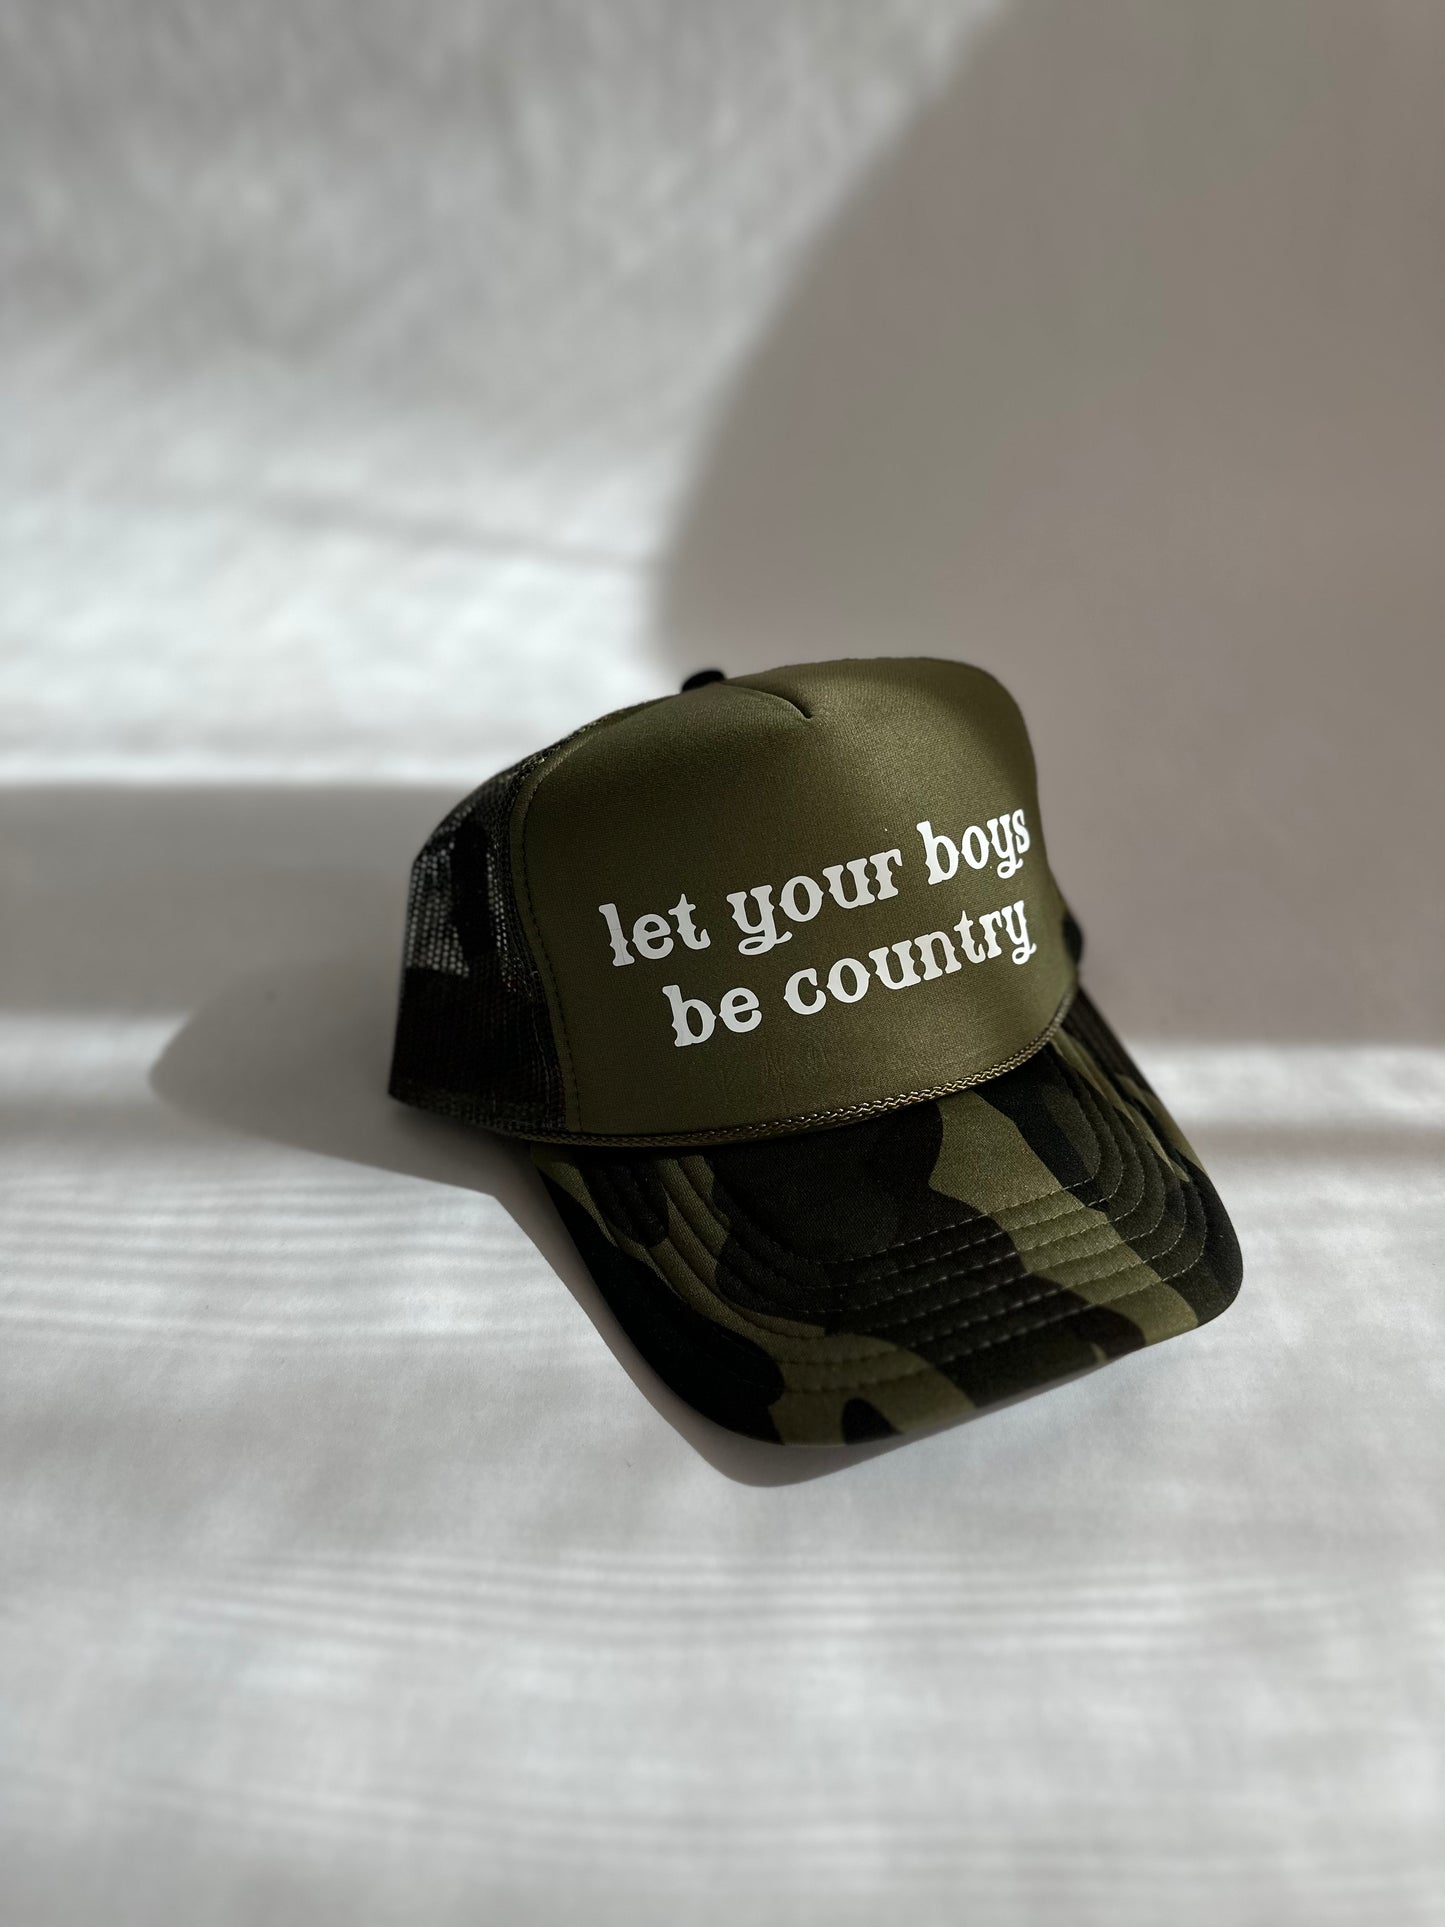 Let you boys be country wording trucker